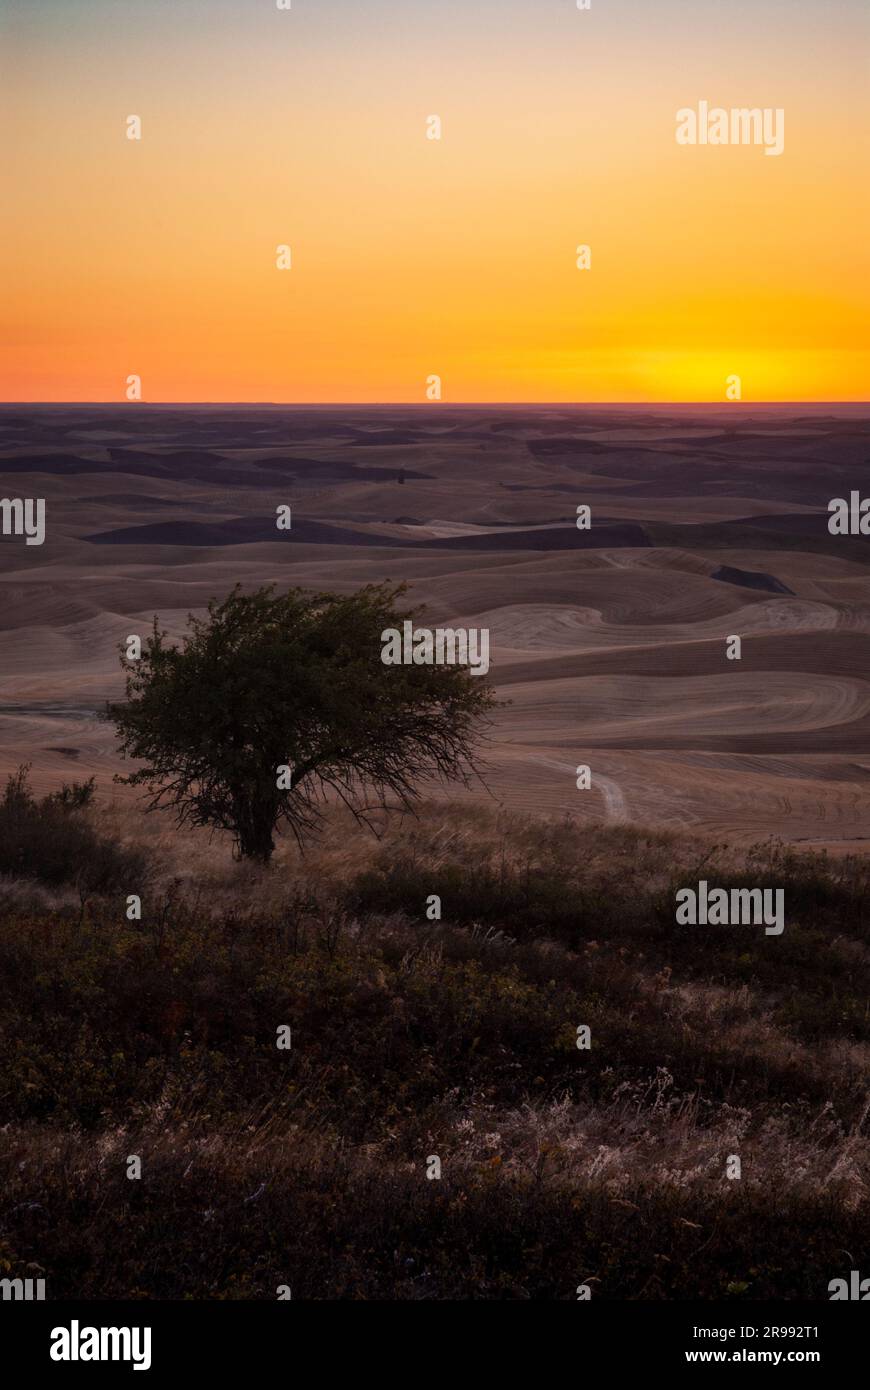 Prairie grasses, crabapple tree and harvested fields in late summer, at sunset, Steptoe Butte State Park, Washington, USA Stock Photo